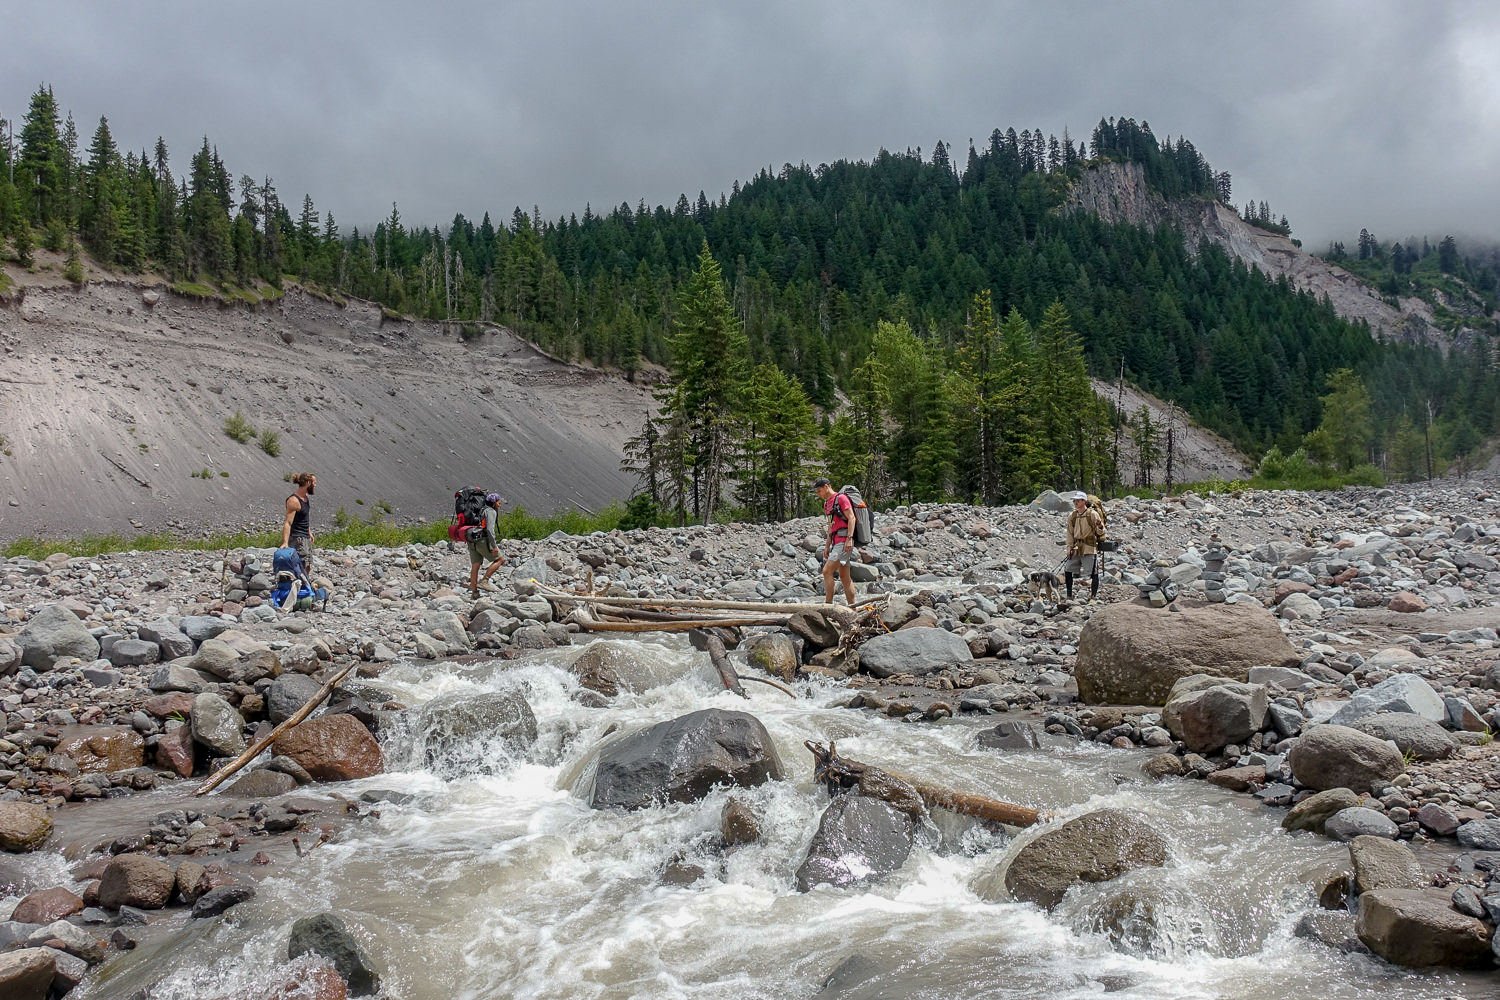 Backpackers fording a river on the Timberline Trail.